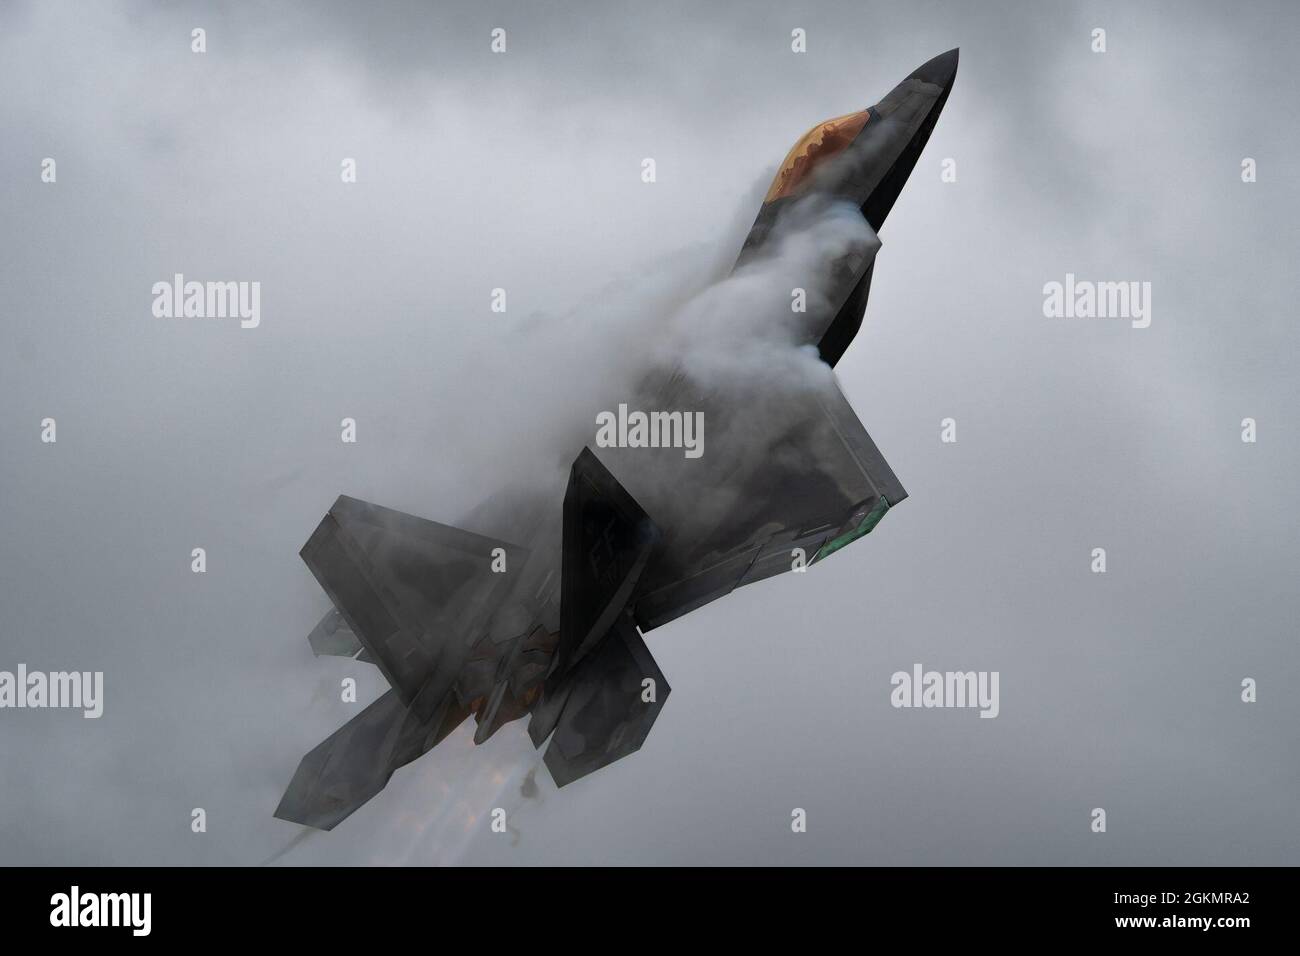 U.S. Air Force Maj. Josh Gunderson, F-22 Raptor Demo Team commander, performs a Pull Push Takeoff during an airshow demonstration during the Westmoreland County Airshow in Latrobe, Pennsylvania, May 29, 2021. The cloud that forms across the aircraft is due to a change in air pressure across the wing causing the moisture to condense into a visible vapor cloud. Stock Photo